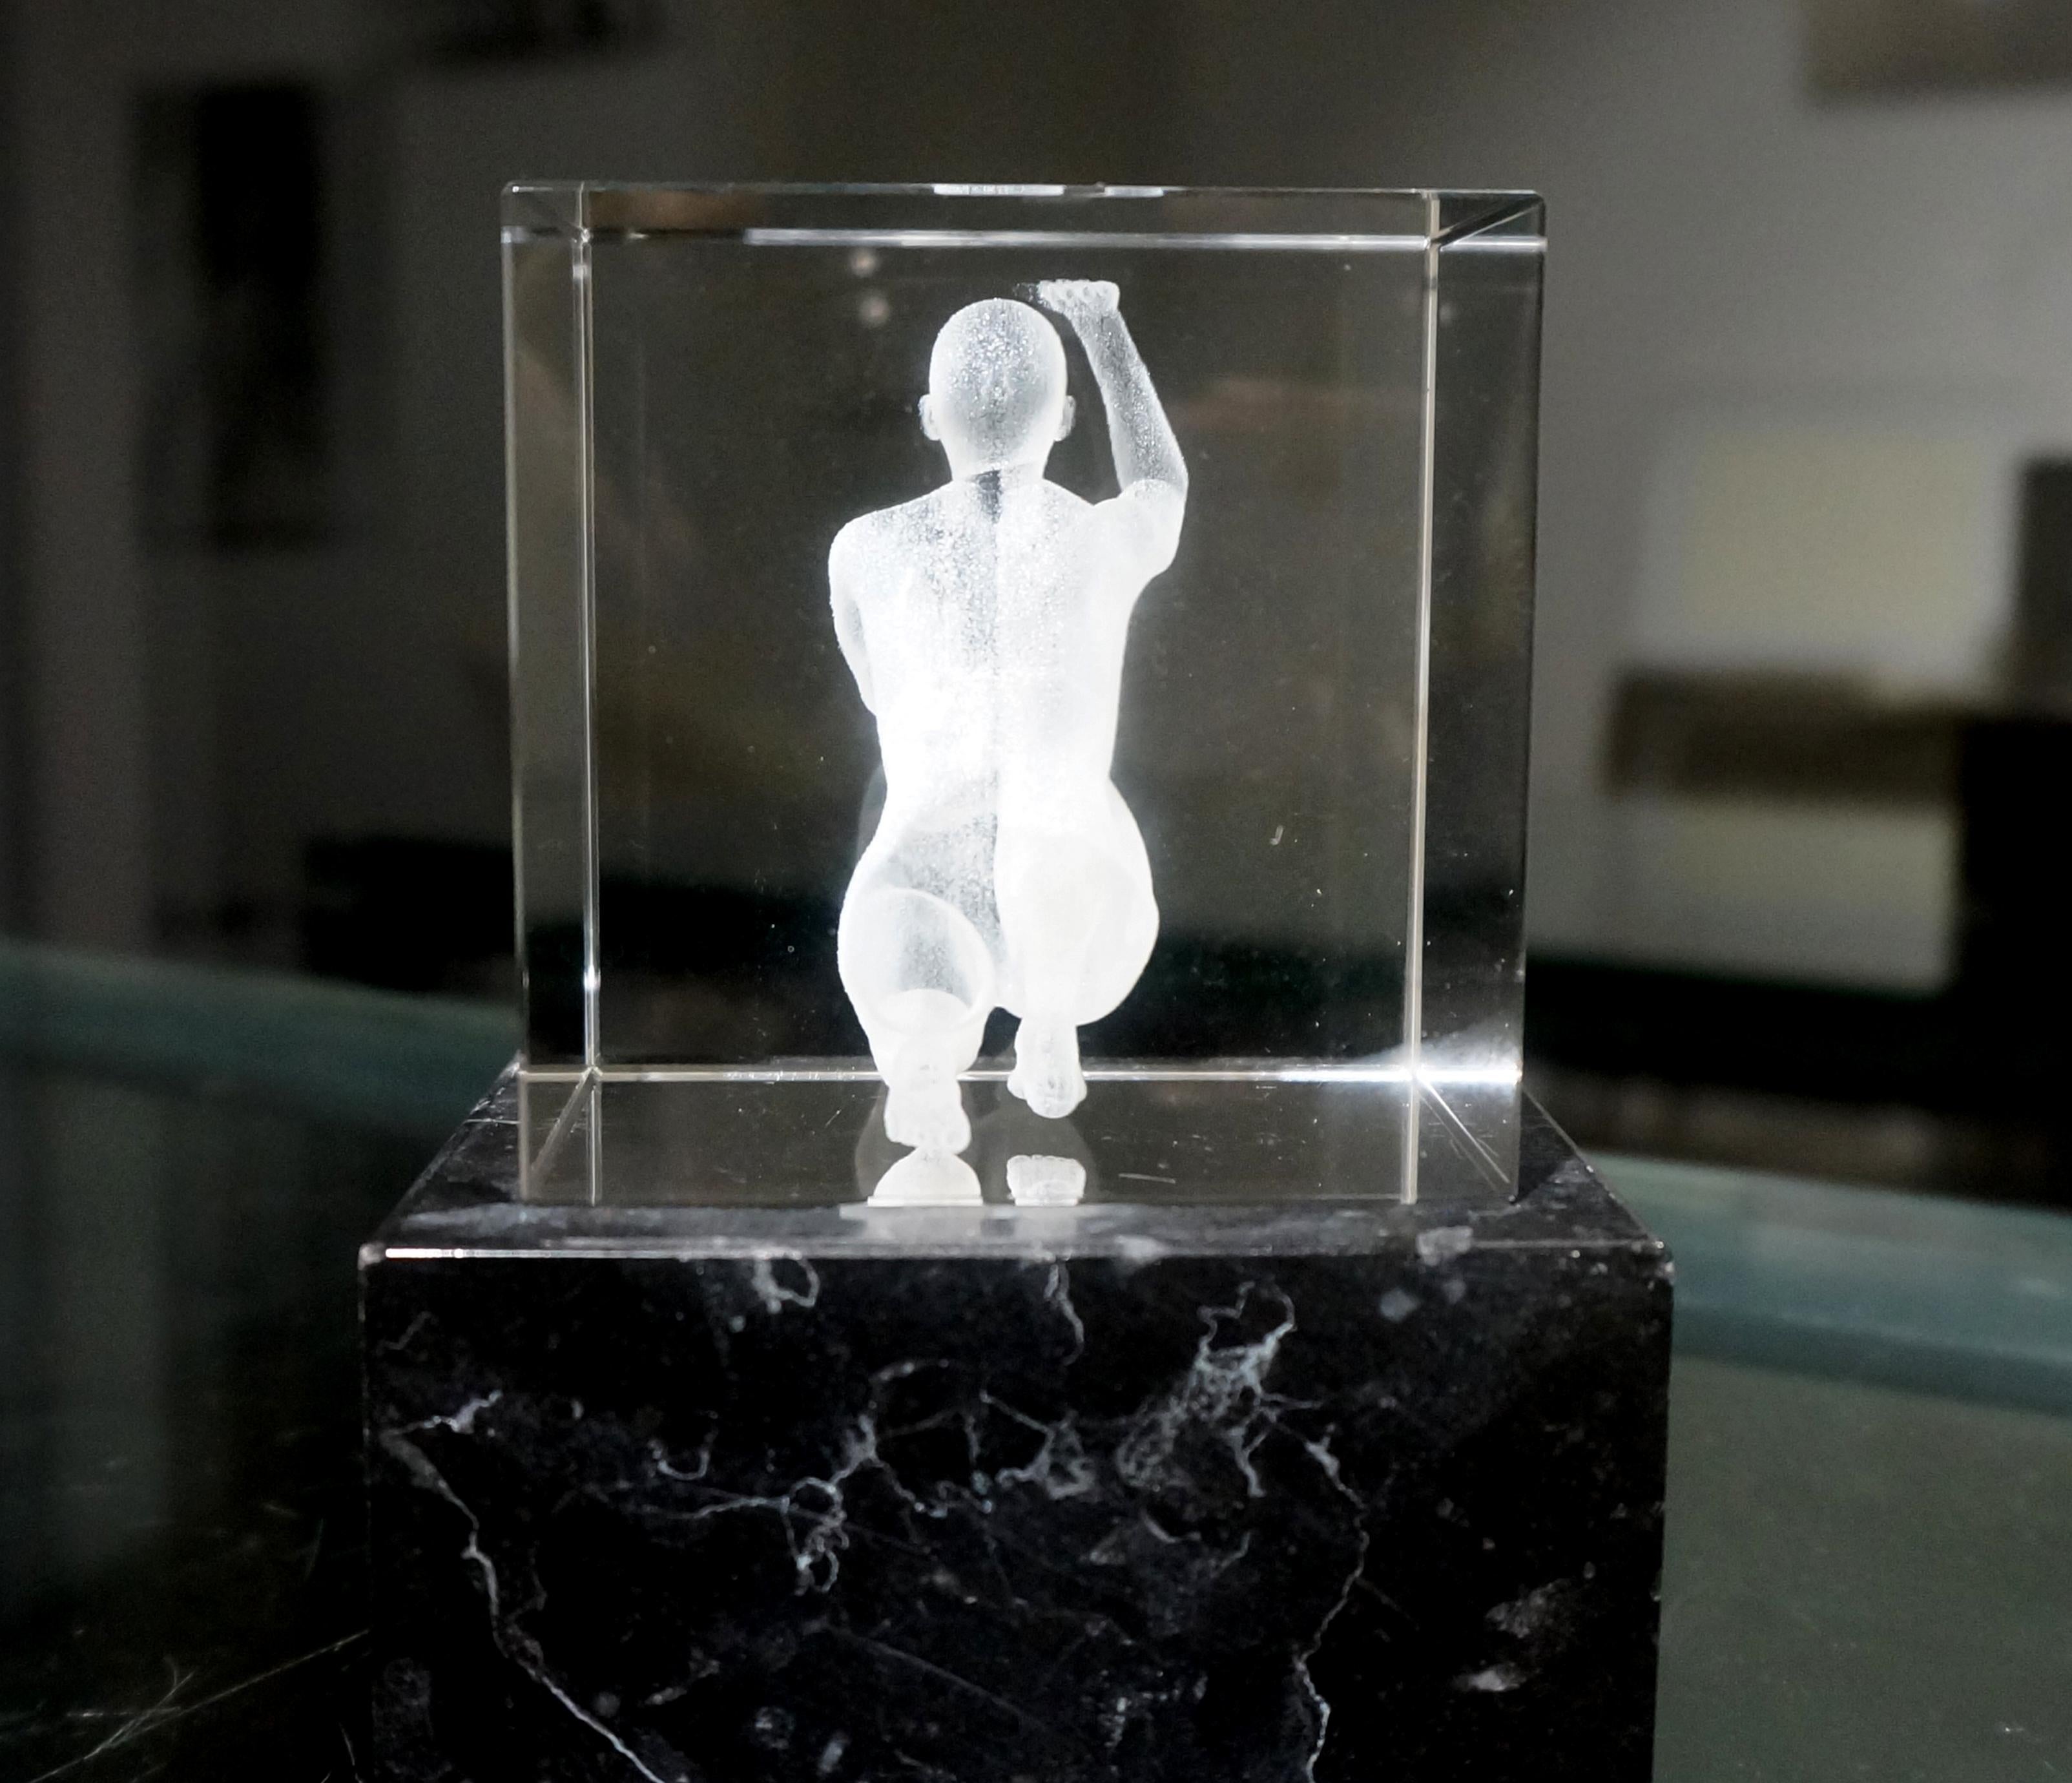 Crystal Glass, Solid Marble, Laser Engraving
8x8 cm

About Artist
As an artist who lives in İstanbul and collaborates with the fields of historiography, politics and sociology, the works I have produced in the last twenty years are dialogues that